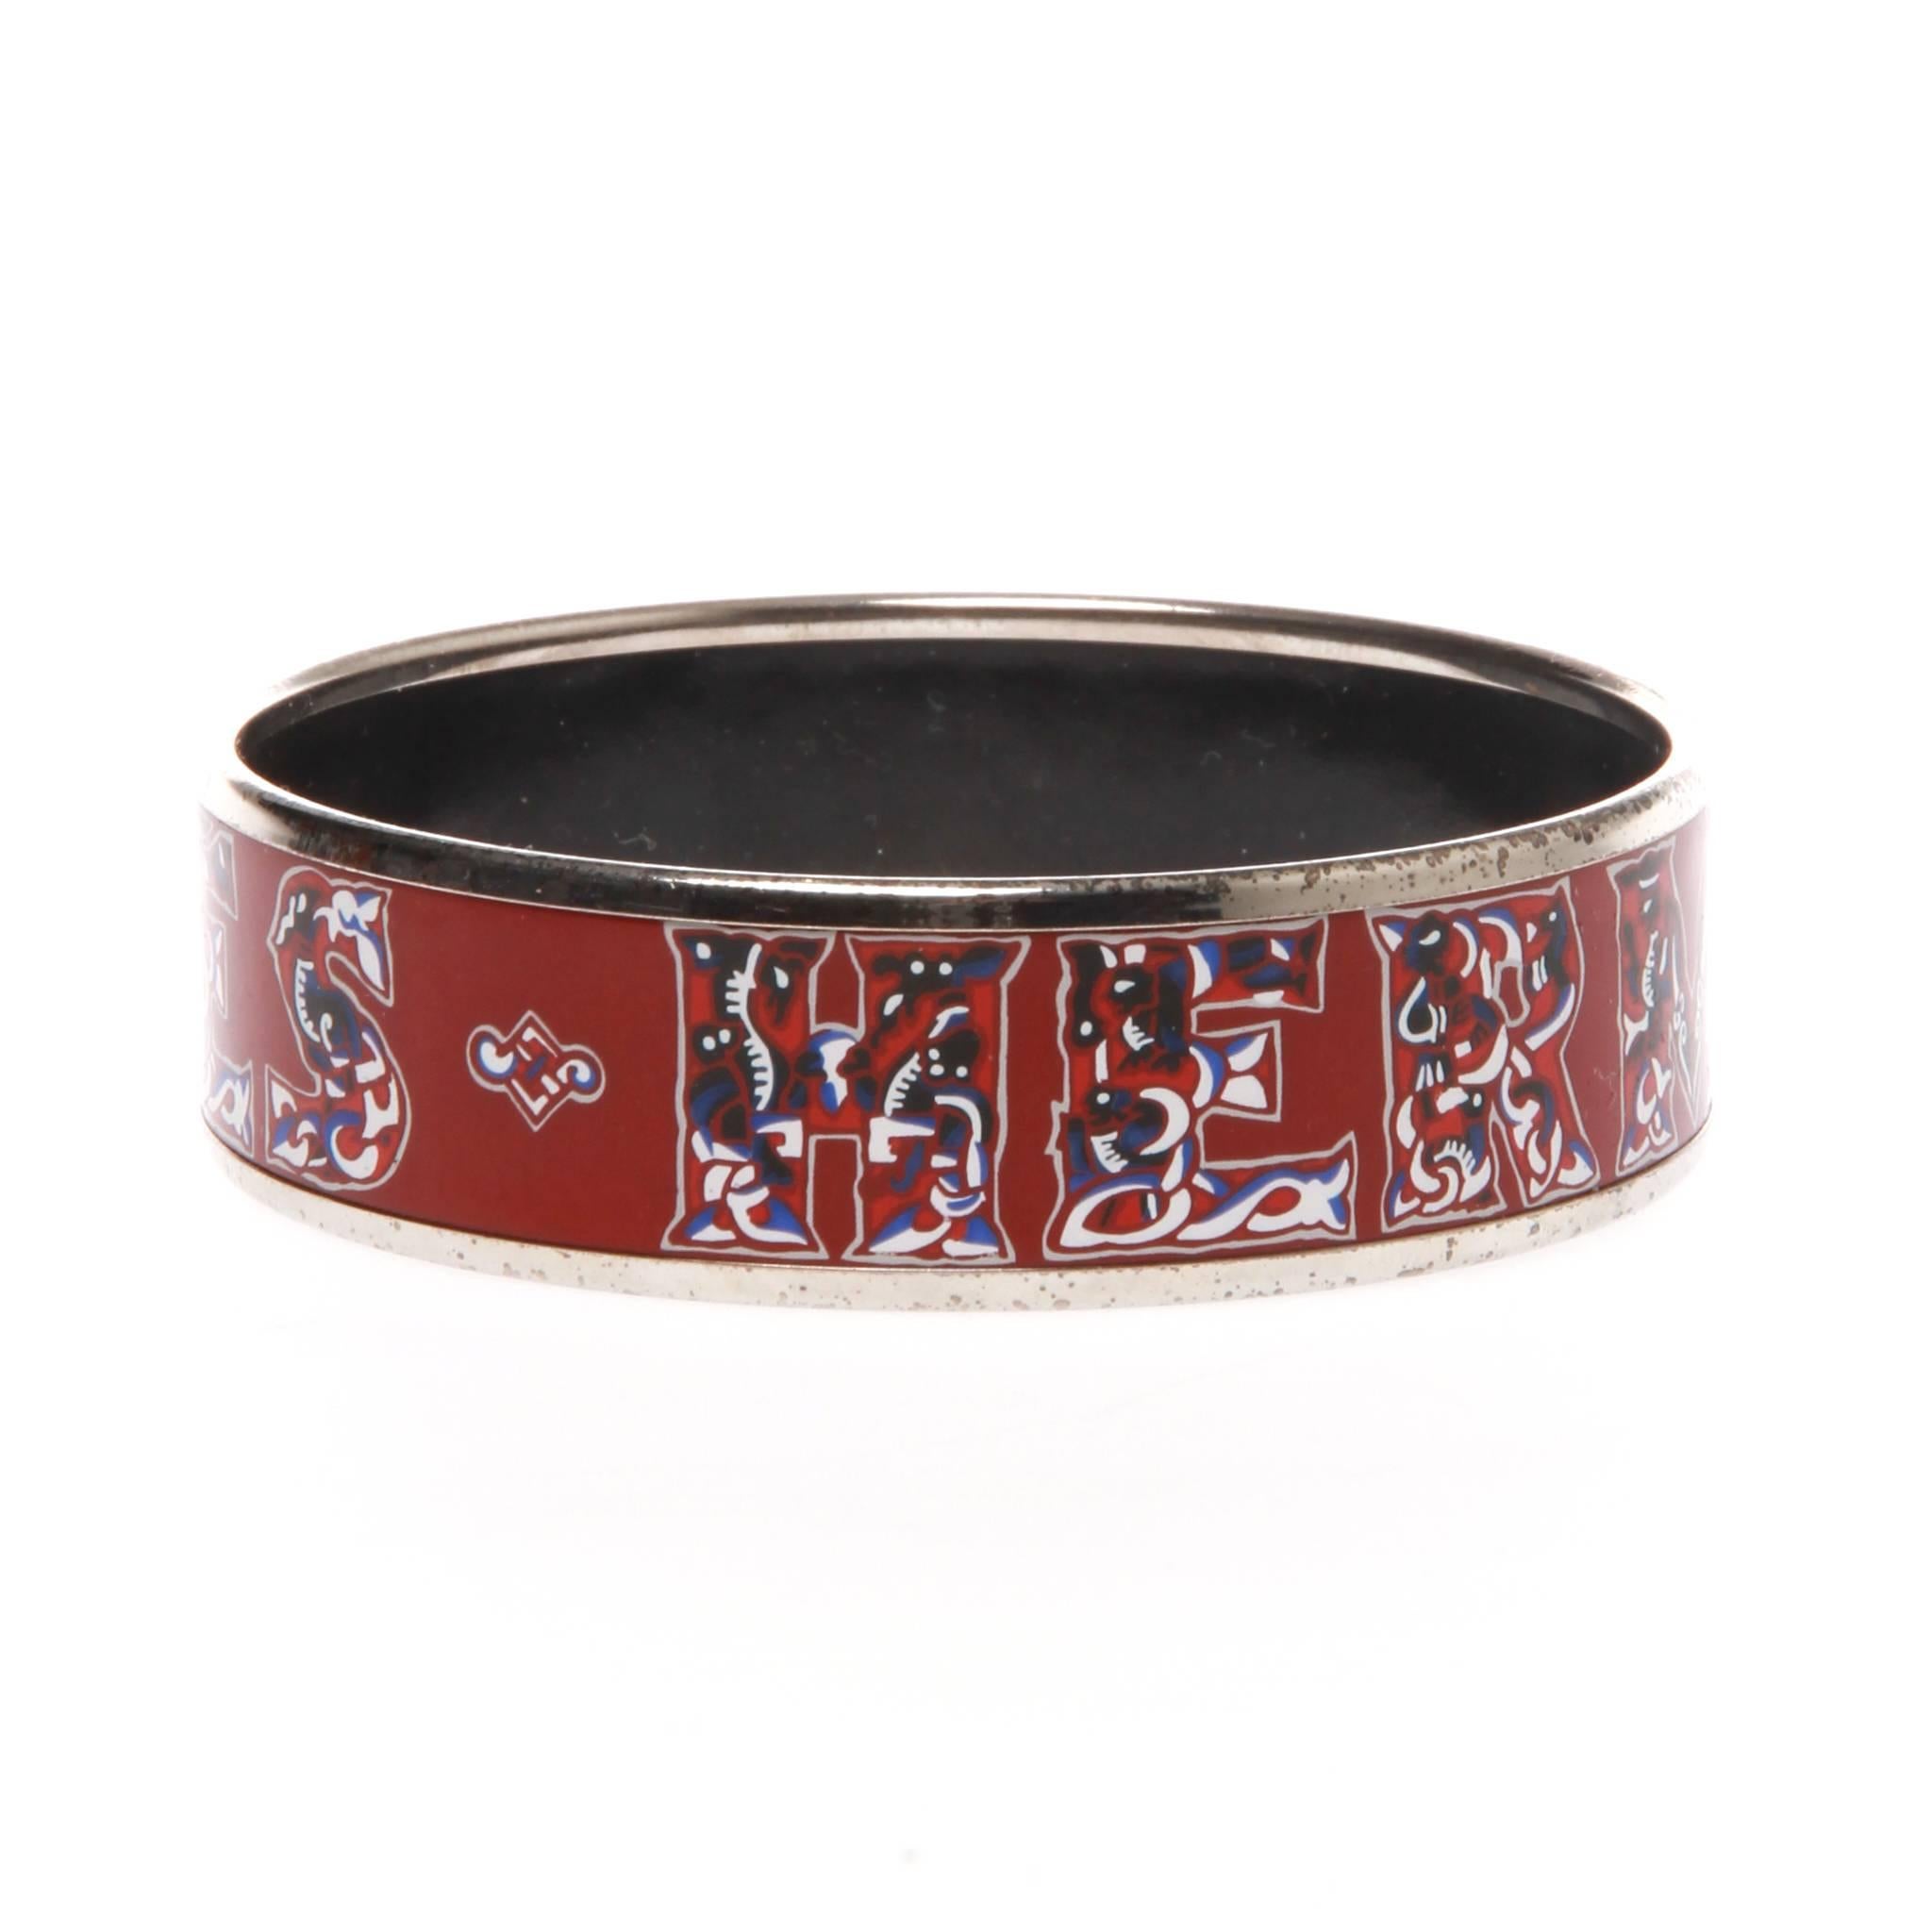 A collectable HERMES Vintage Cuff Bracelet.
Features red enamel with an iconic Hermes logo print.
Punctuate your look with this vintage HERMES enamel cuff bracelet made in Austria.
Pair it with a flowing gown, for an evening opulence.